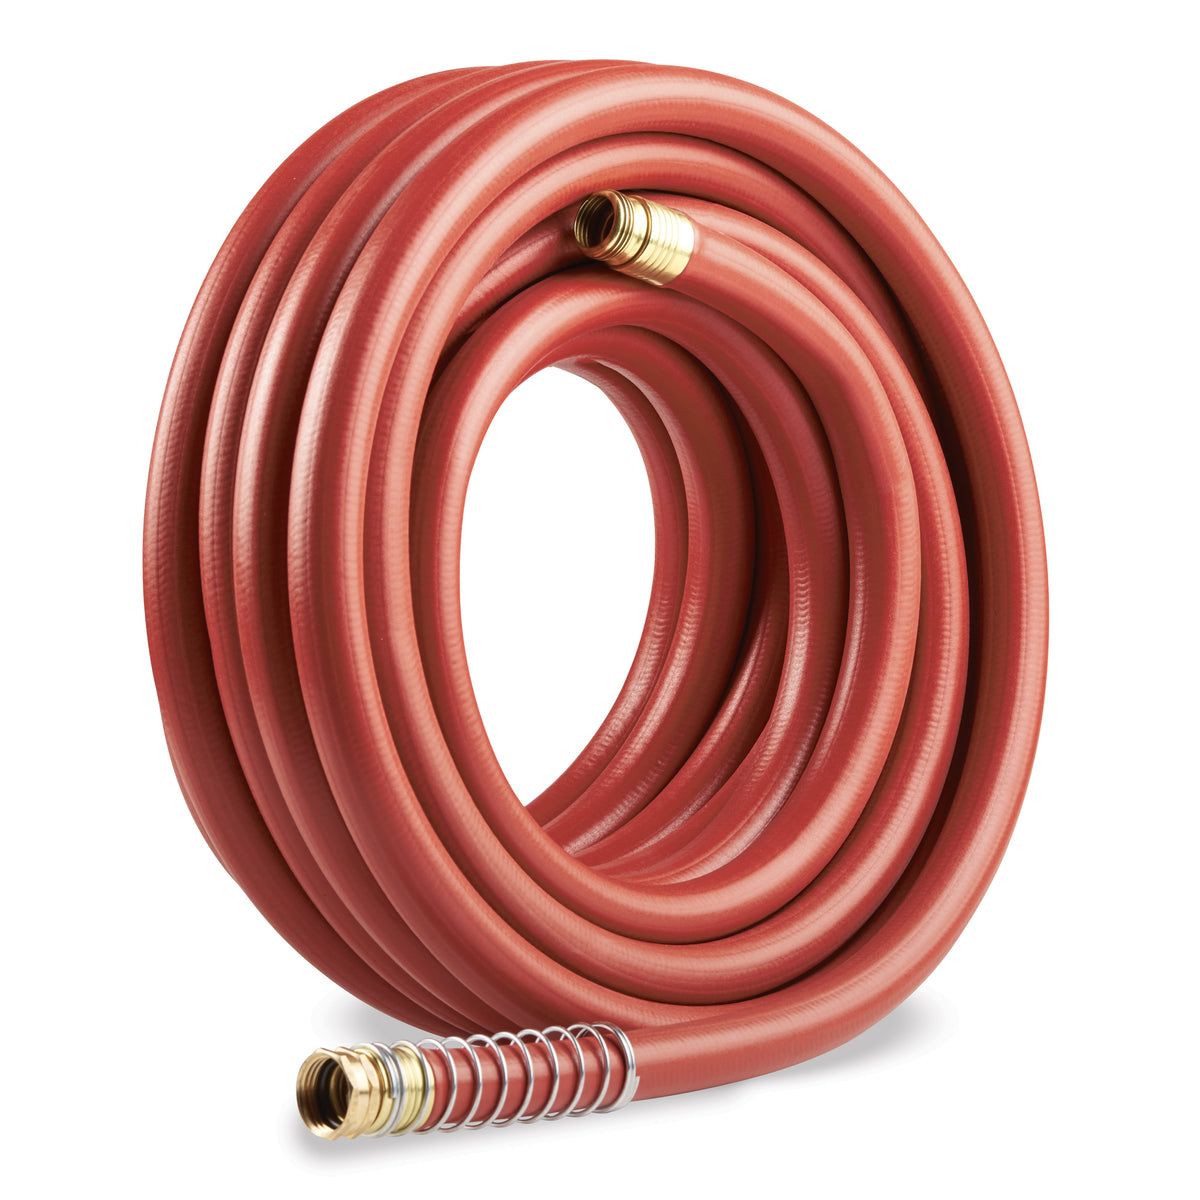 Gilmour 840751-1002  Professional Commercial Hose, 3/4 Inch x 75 Feet